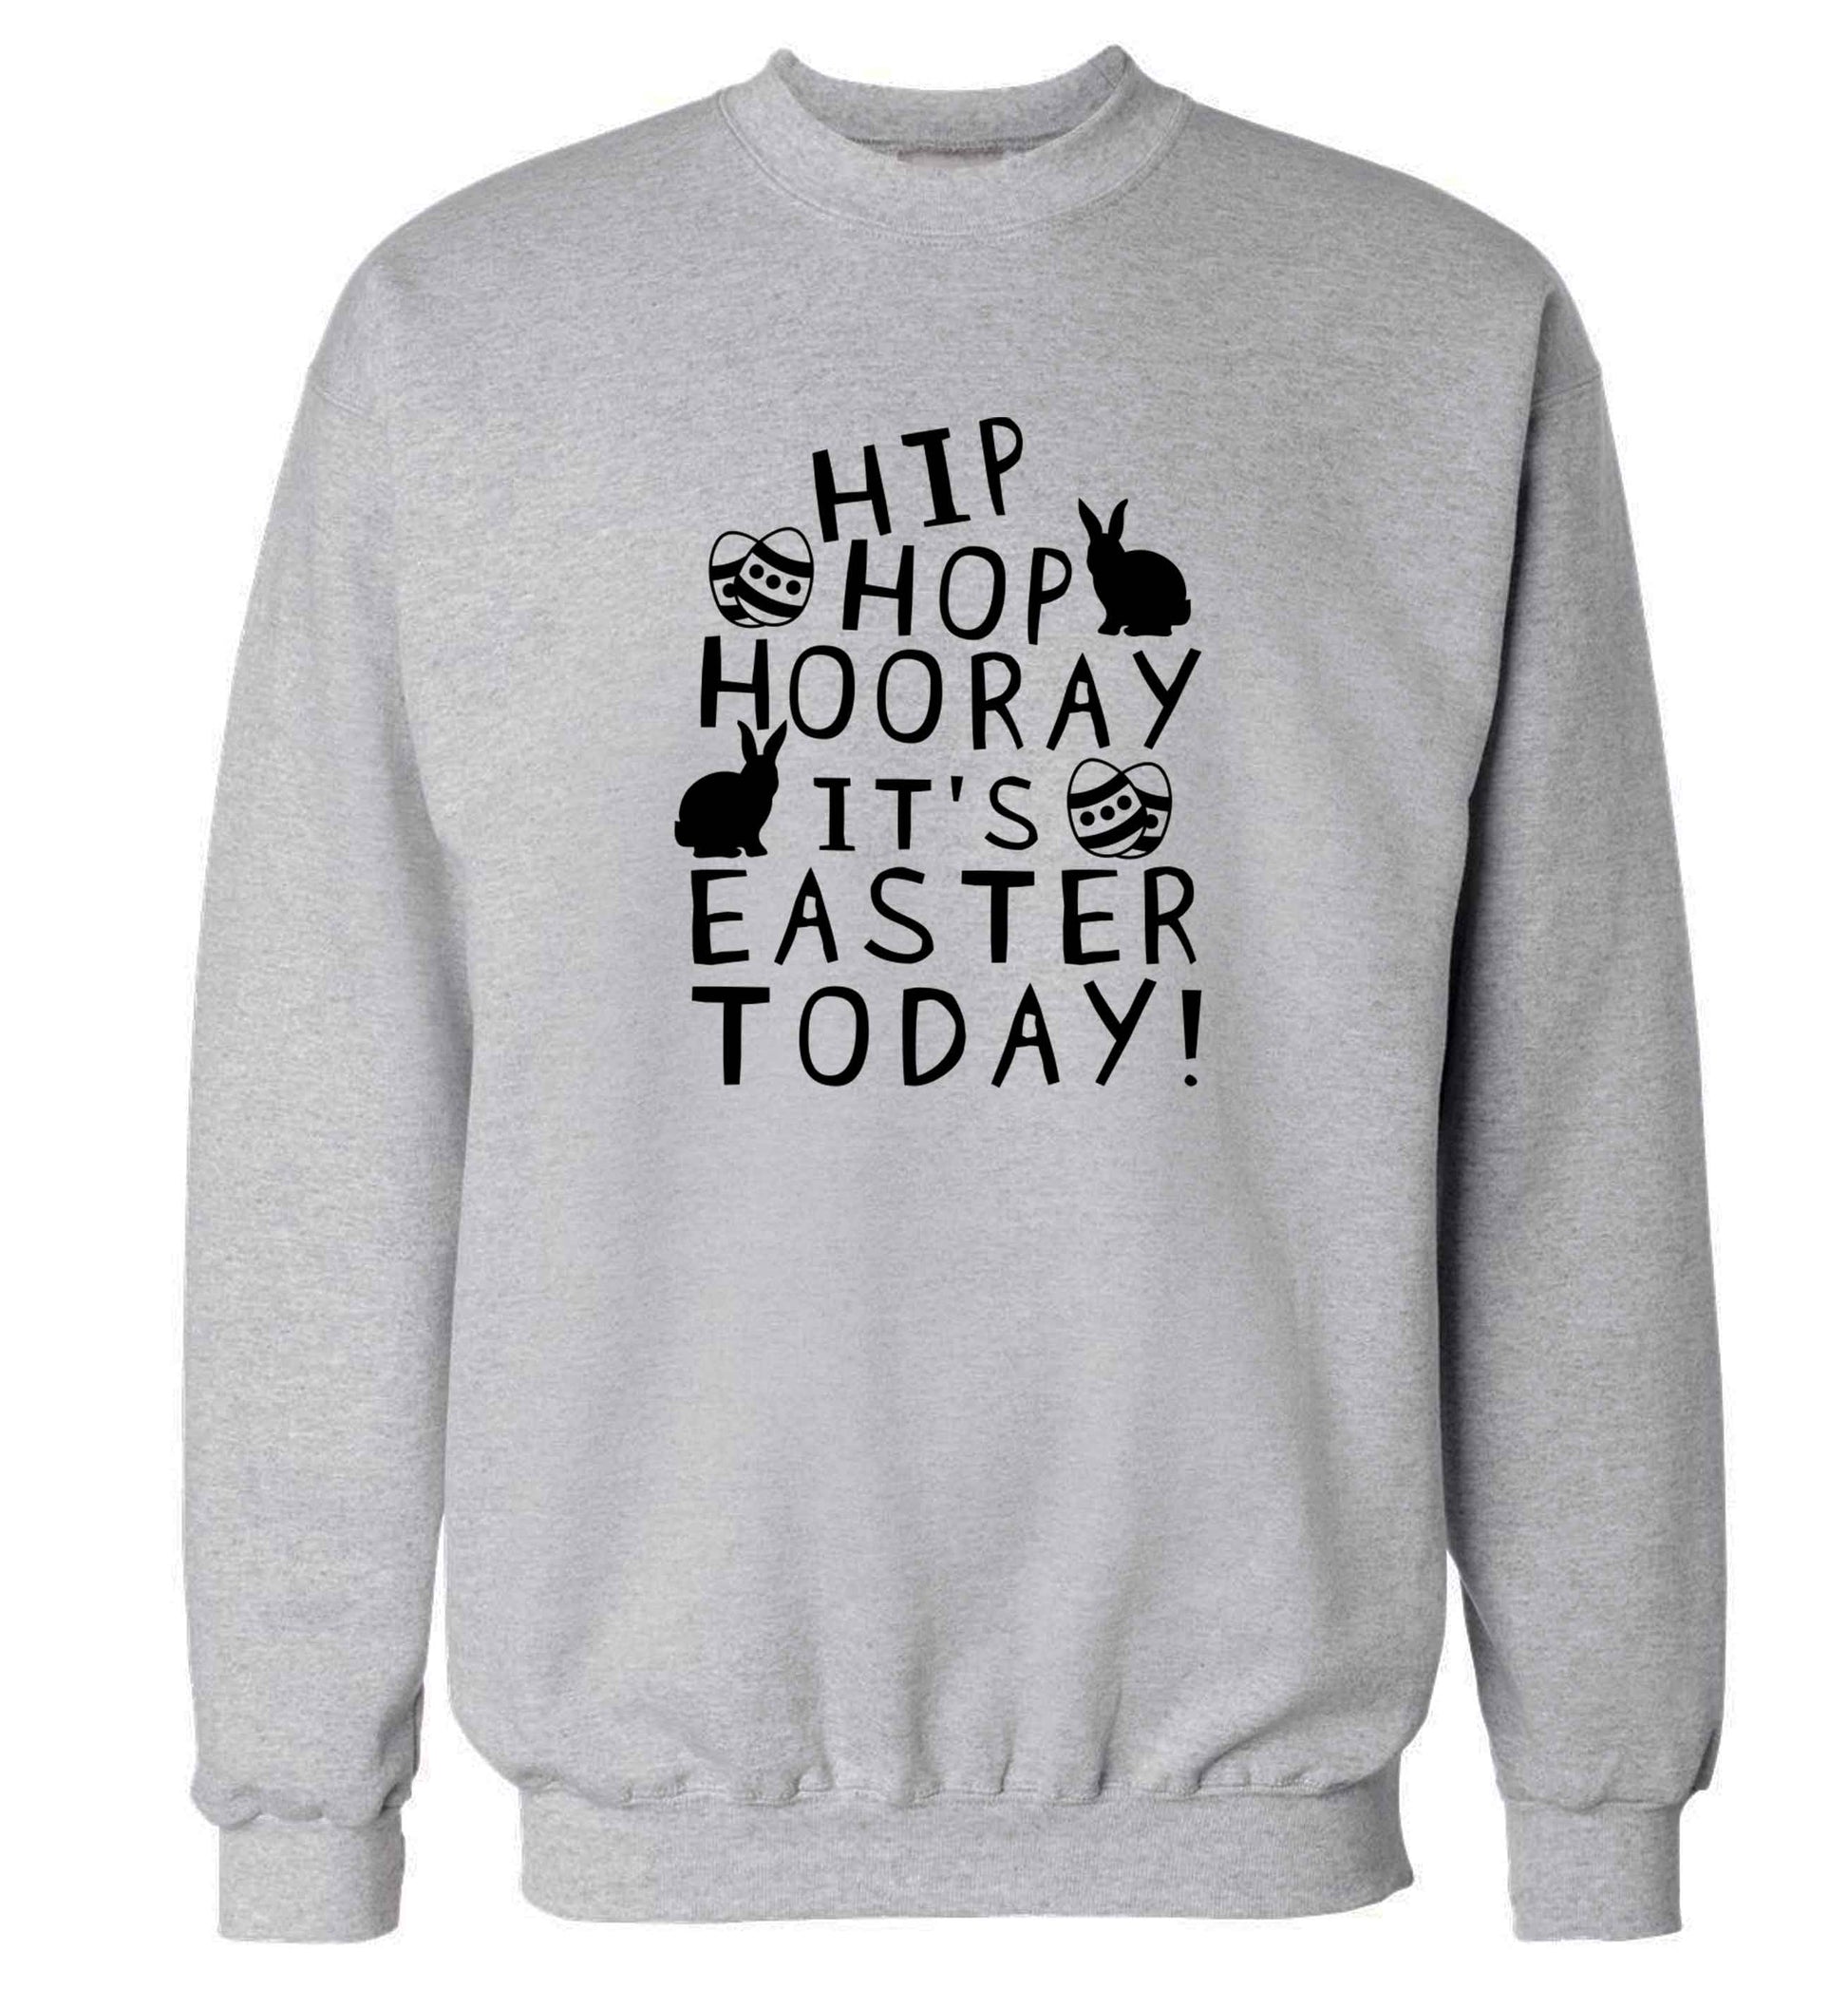 Hip hip hooray it's Easter today! adult's unisex grey sweater 2XL